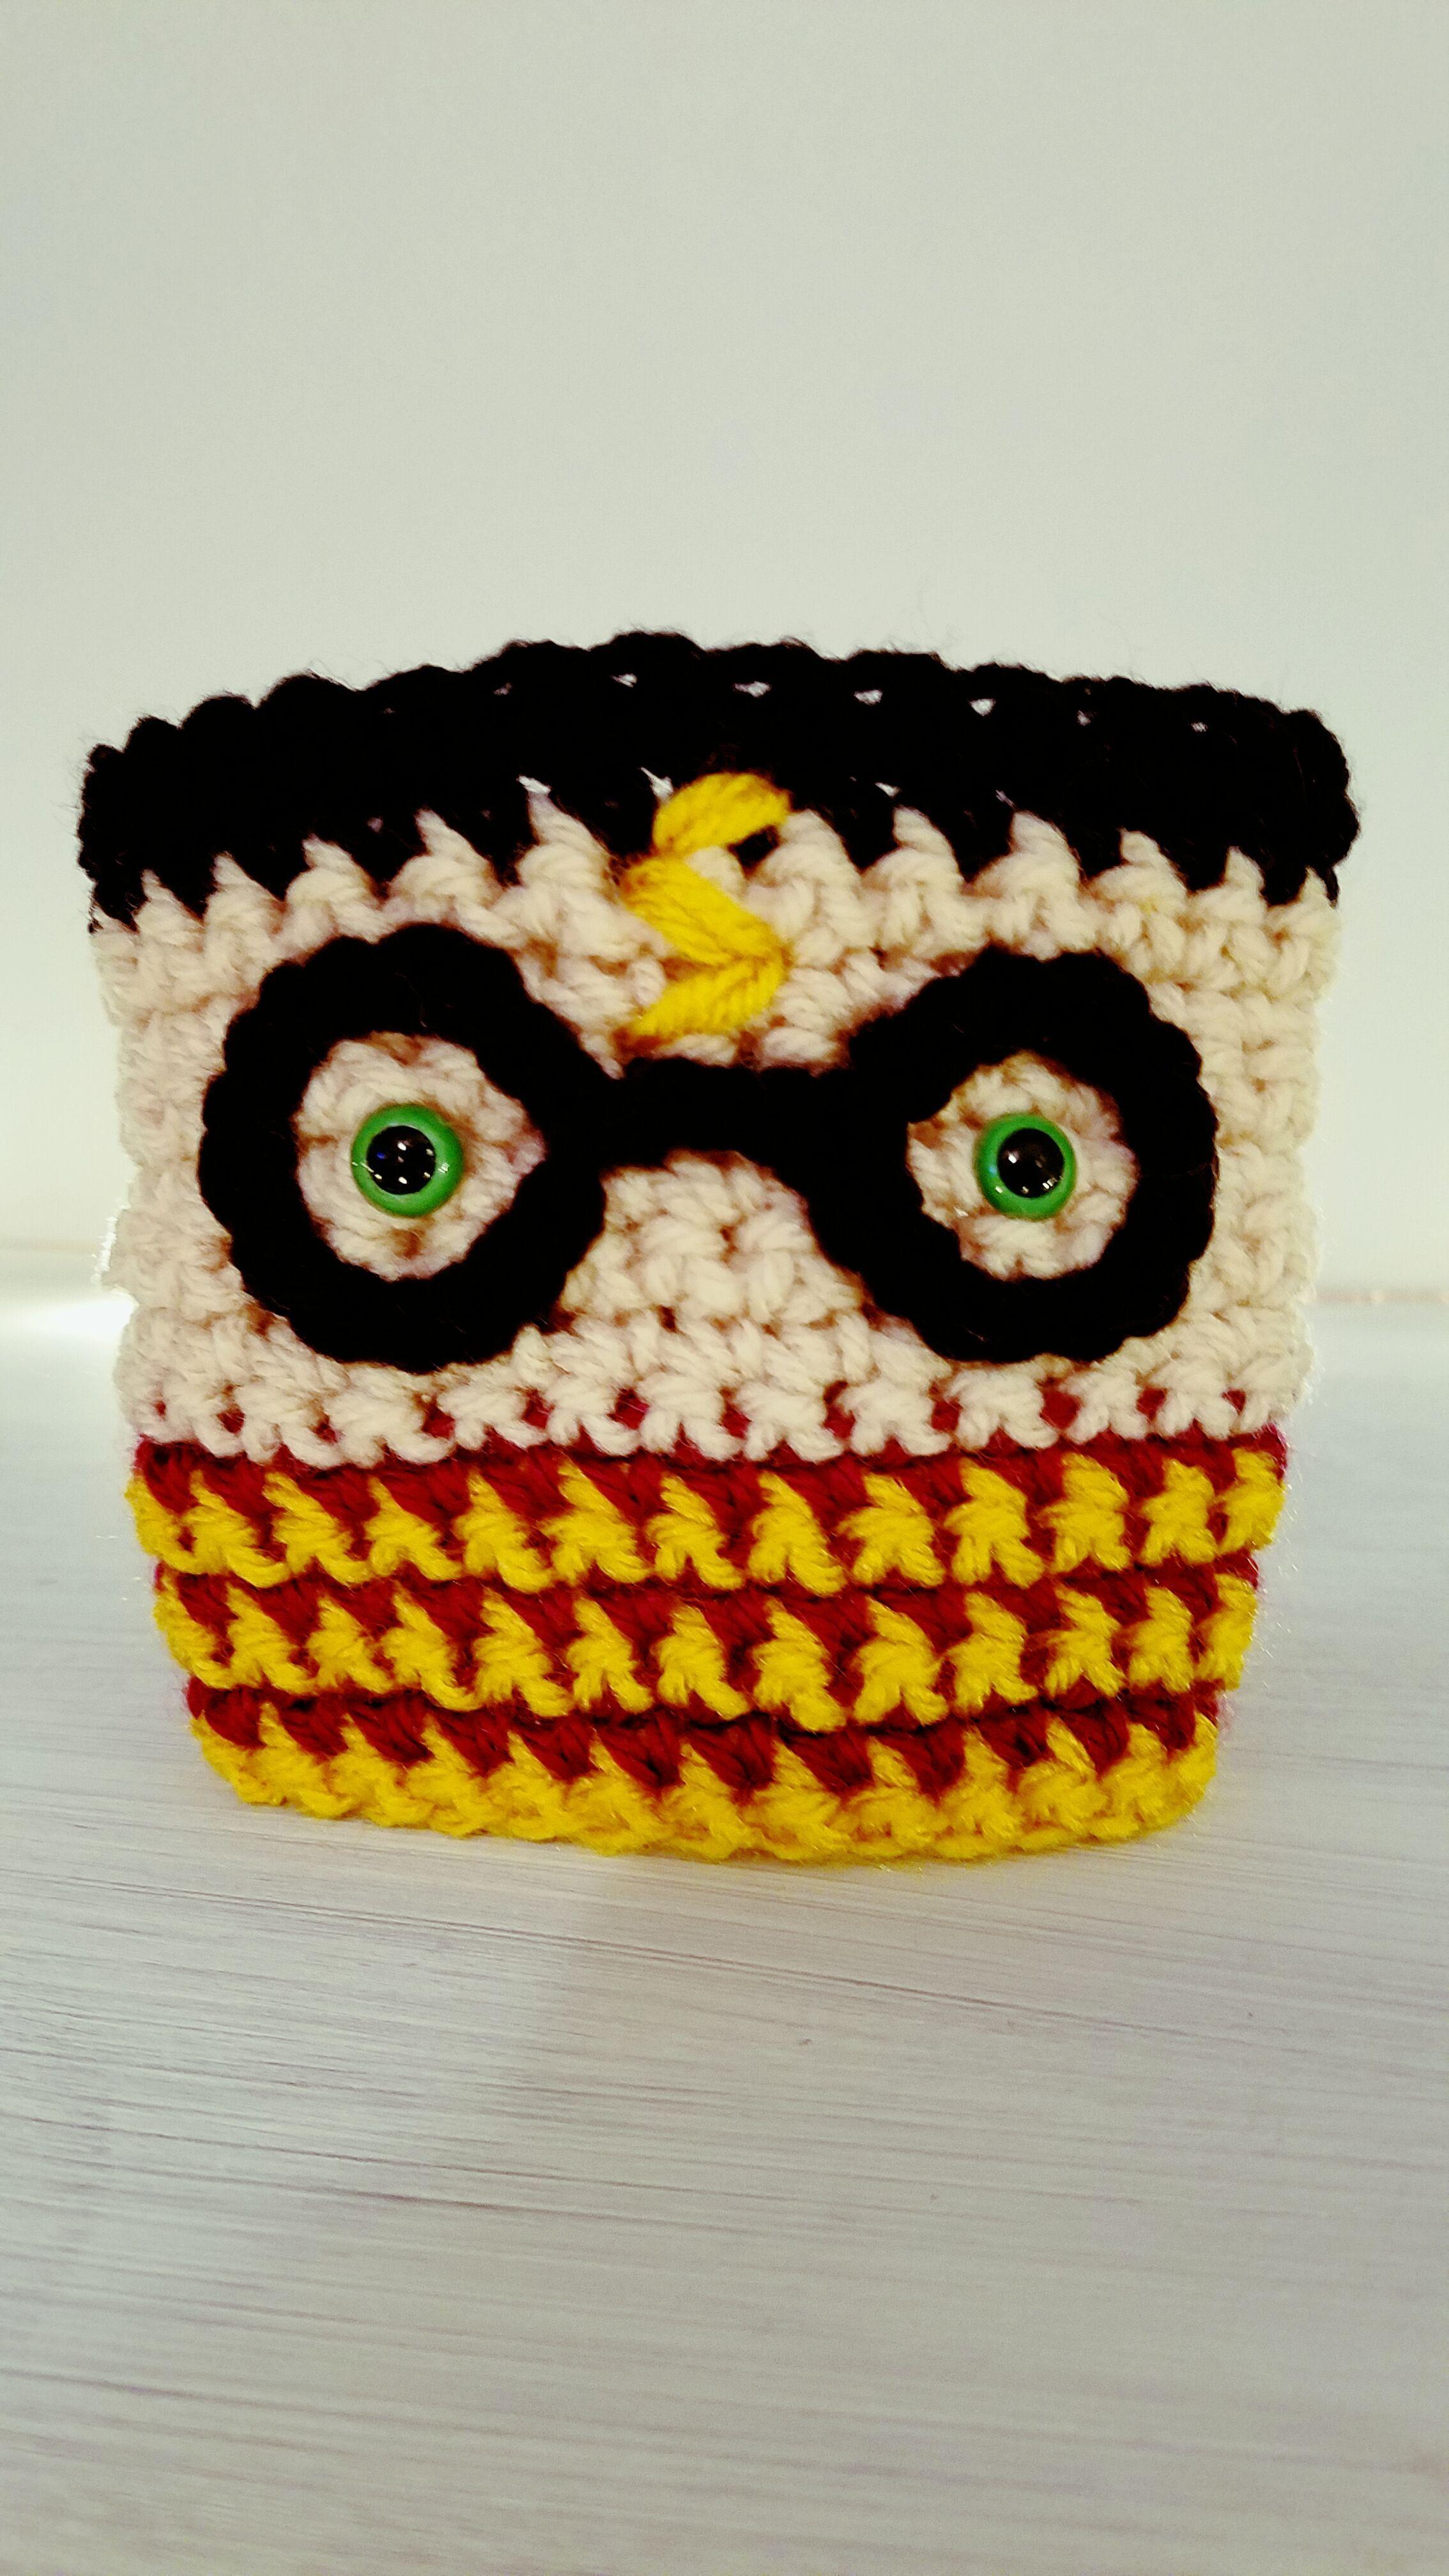 Crochet Harry Potter HP Logo - Hello Lovies! So, who doesn't love some Harry Potter as well as all